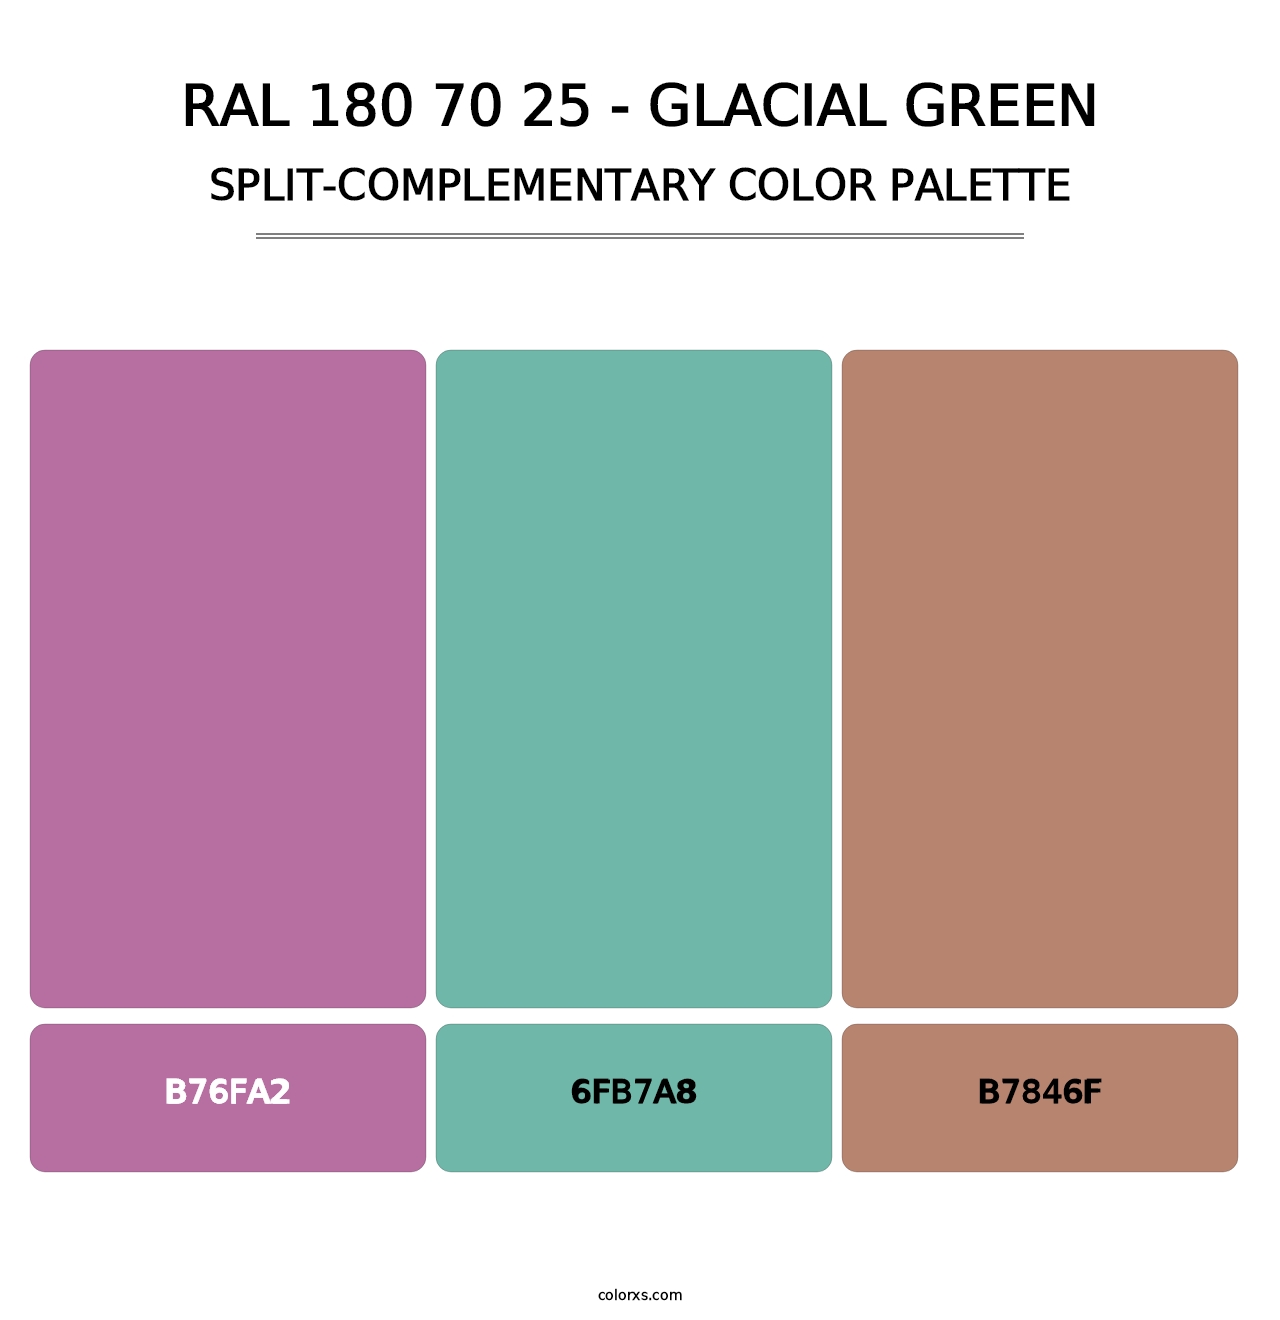 RAL 180 70 25 - Glacial Green - Split-Complementary Color Palette